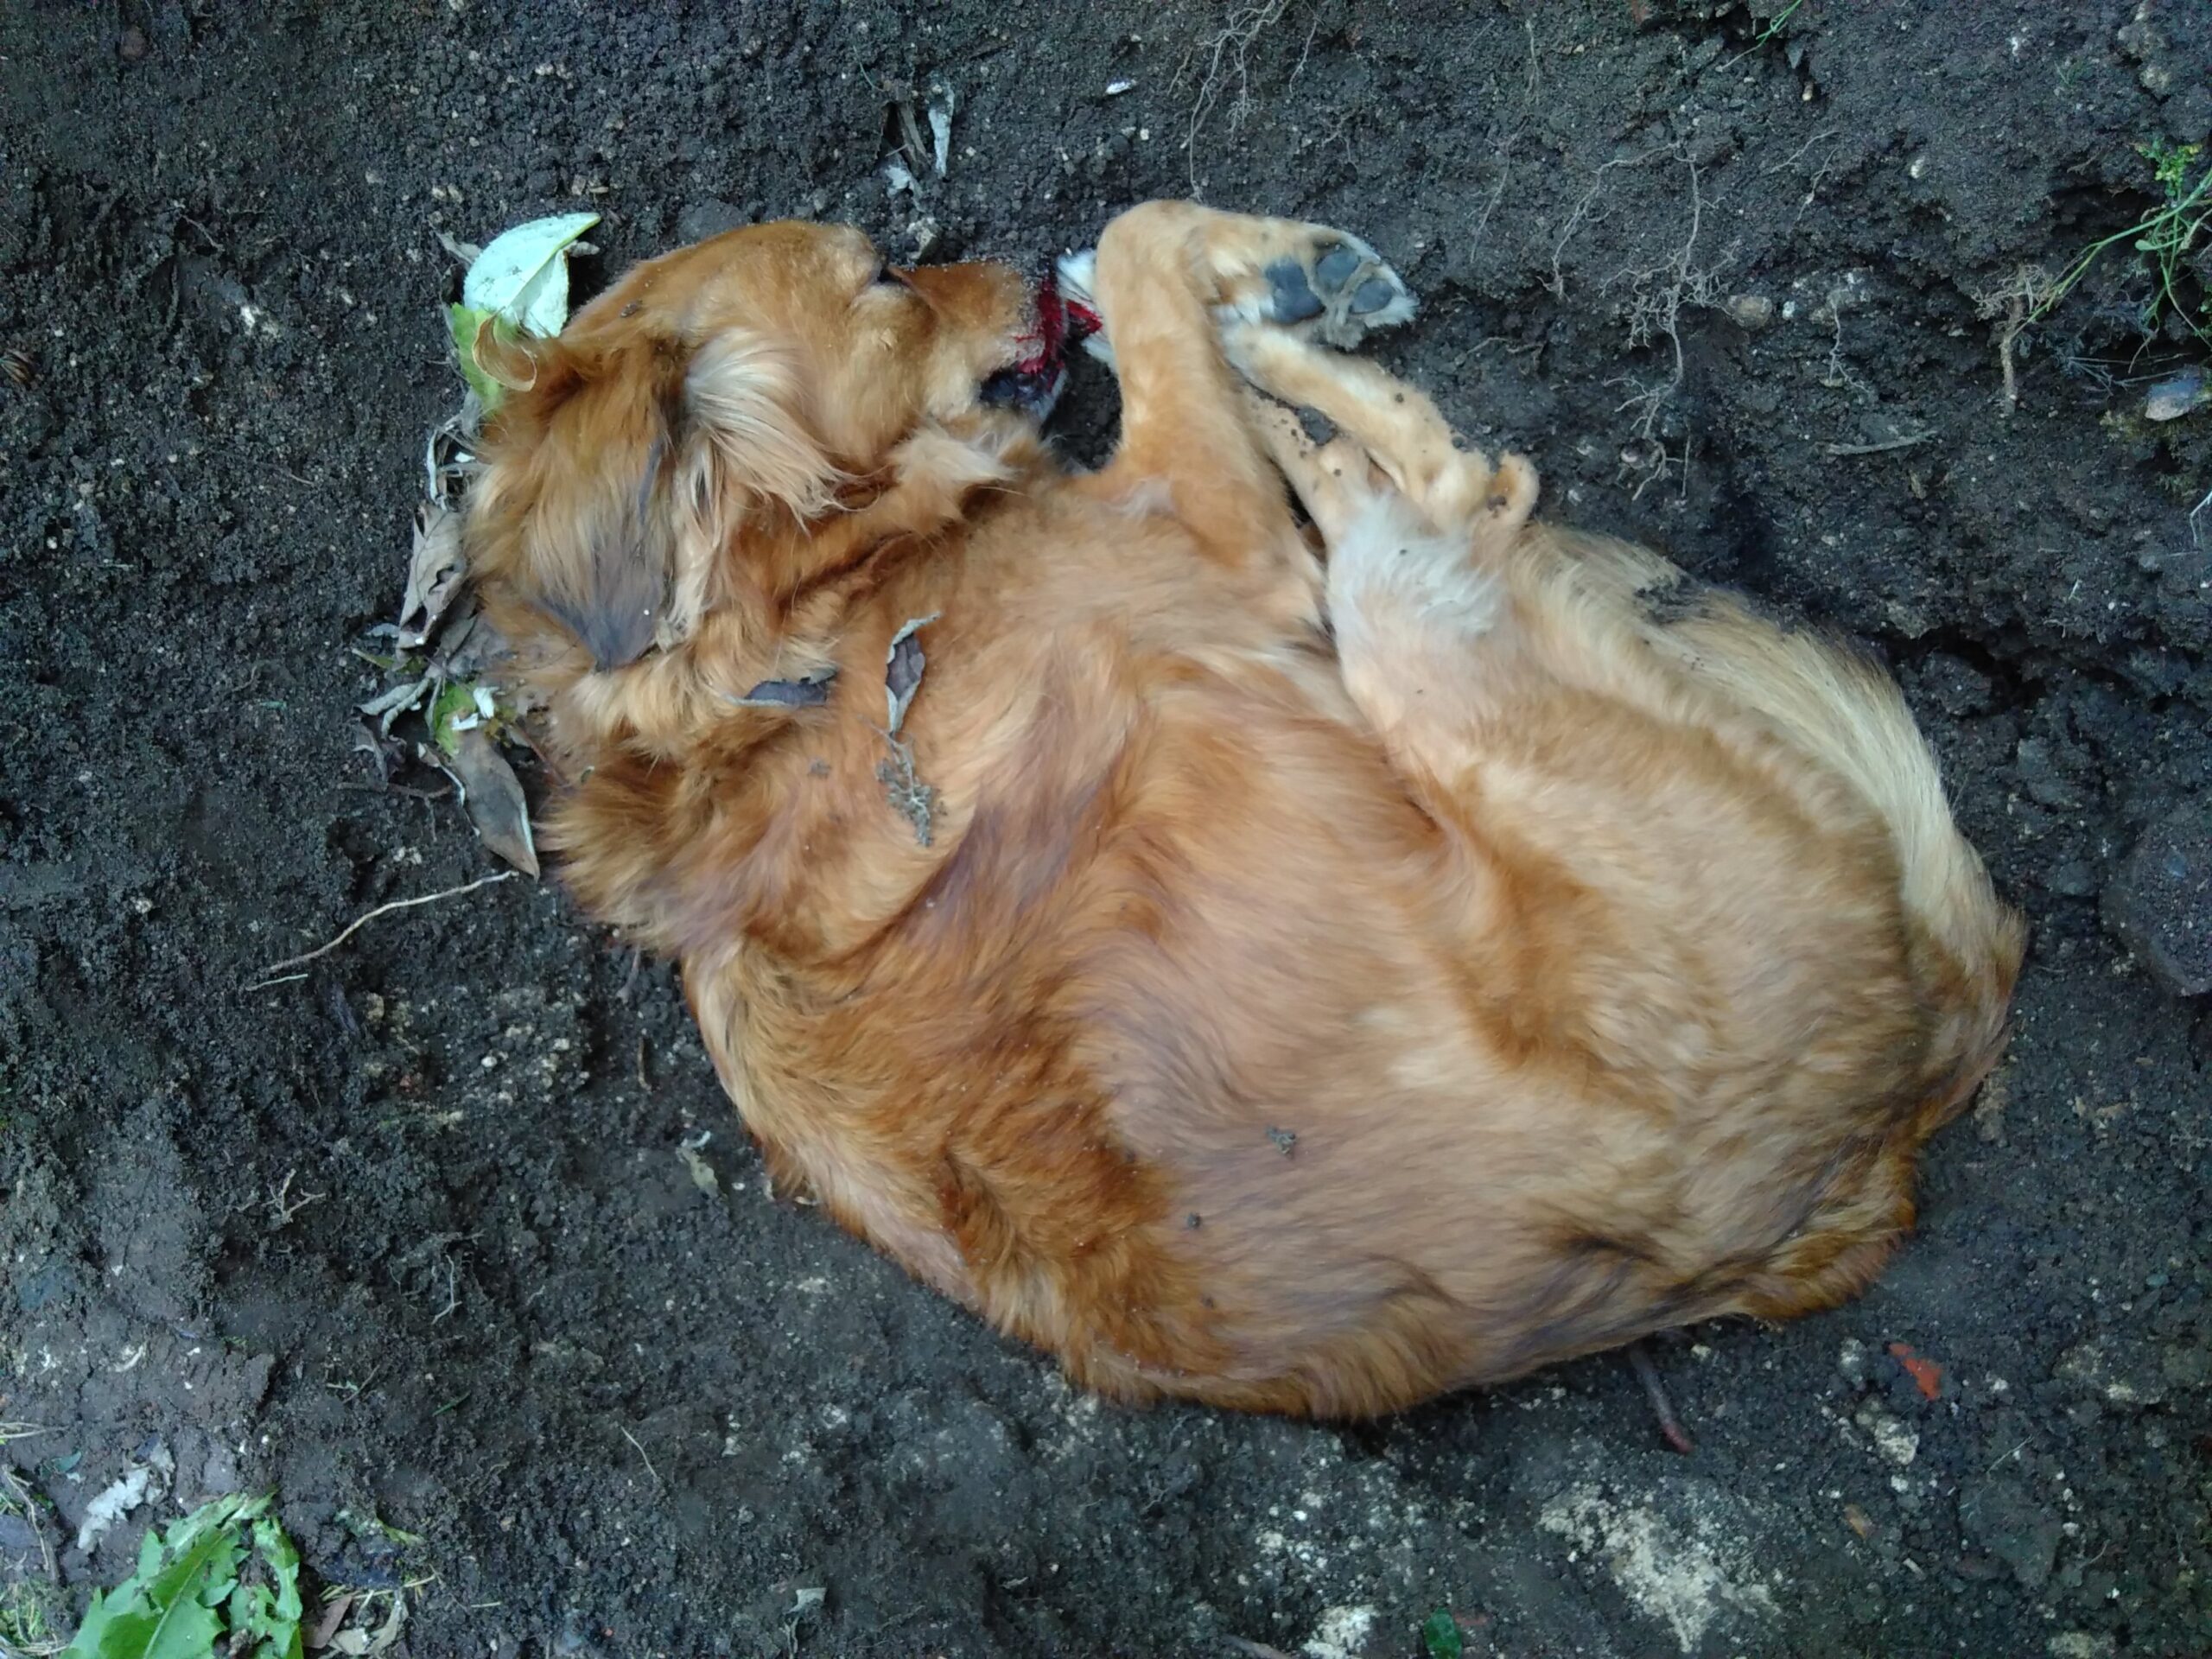 A dog lies curled in wet earth, her nose, tucked between her front paws, covered in blood.